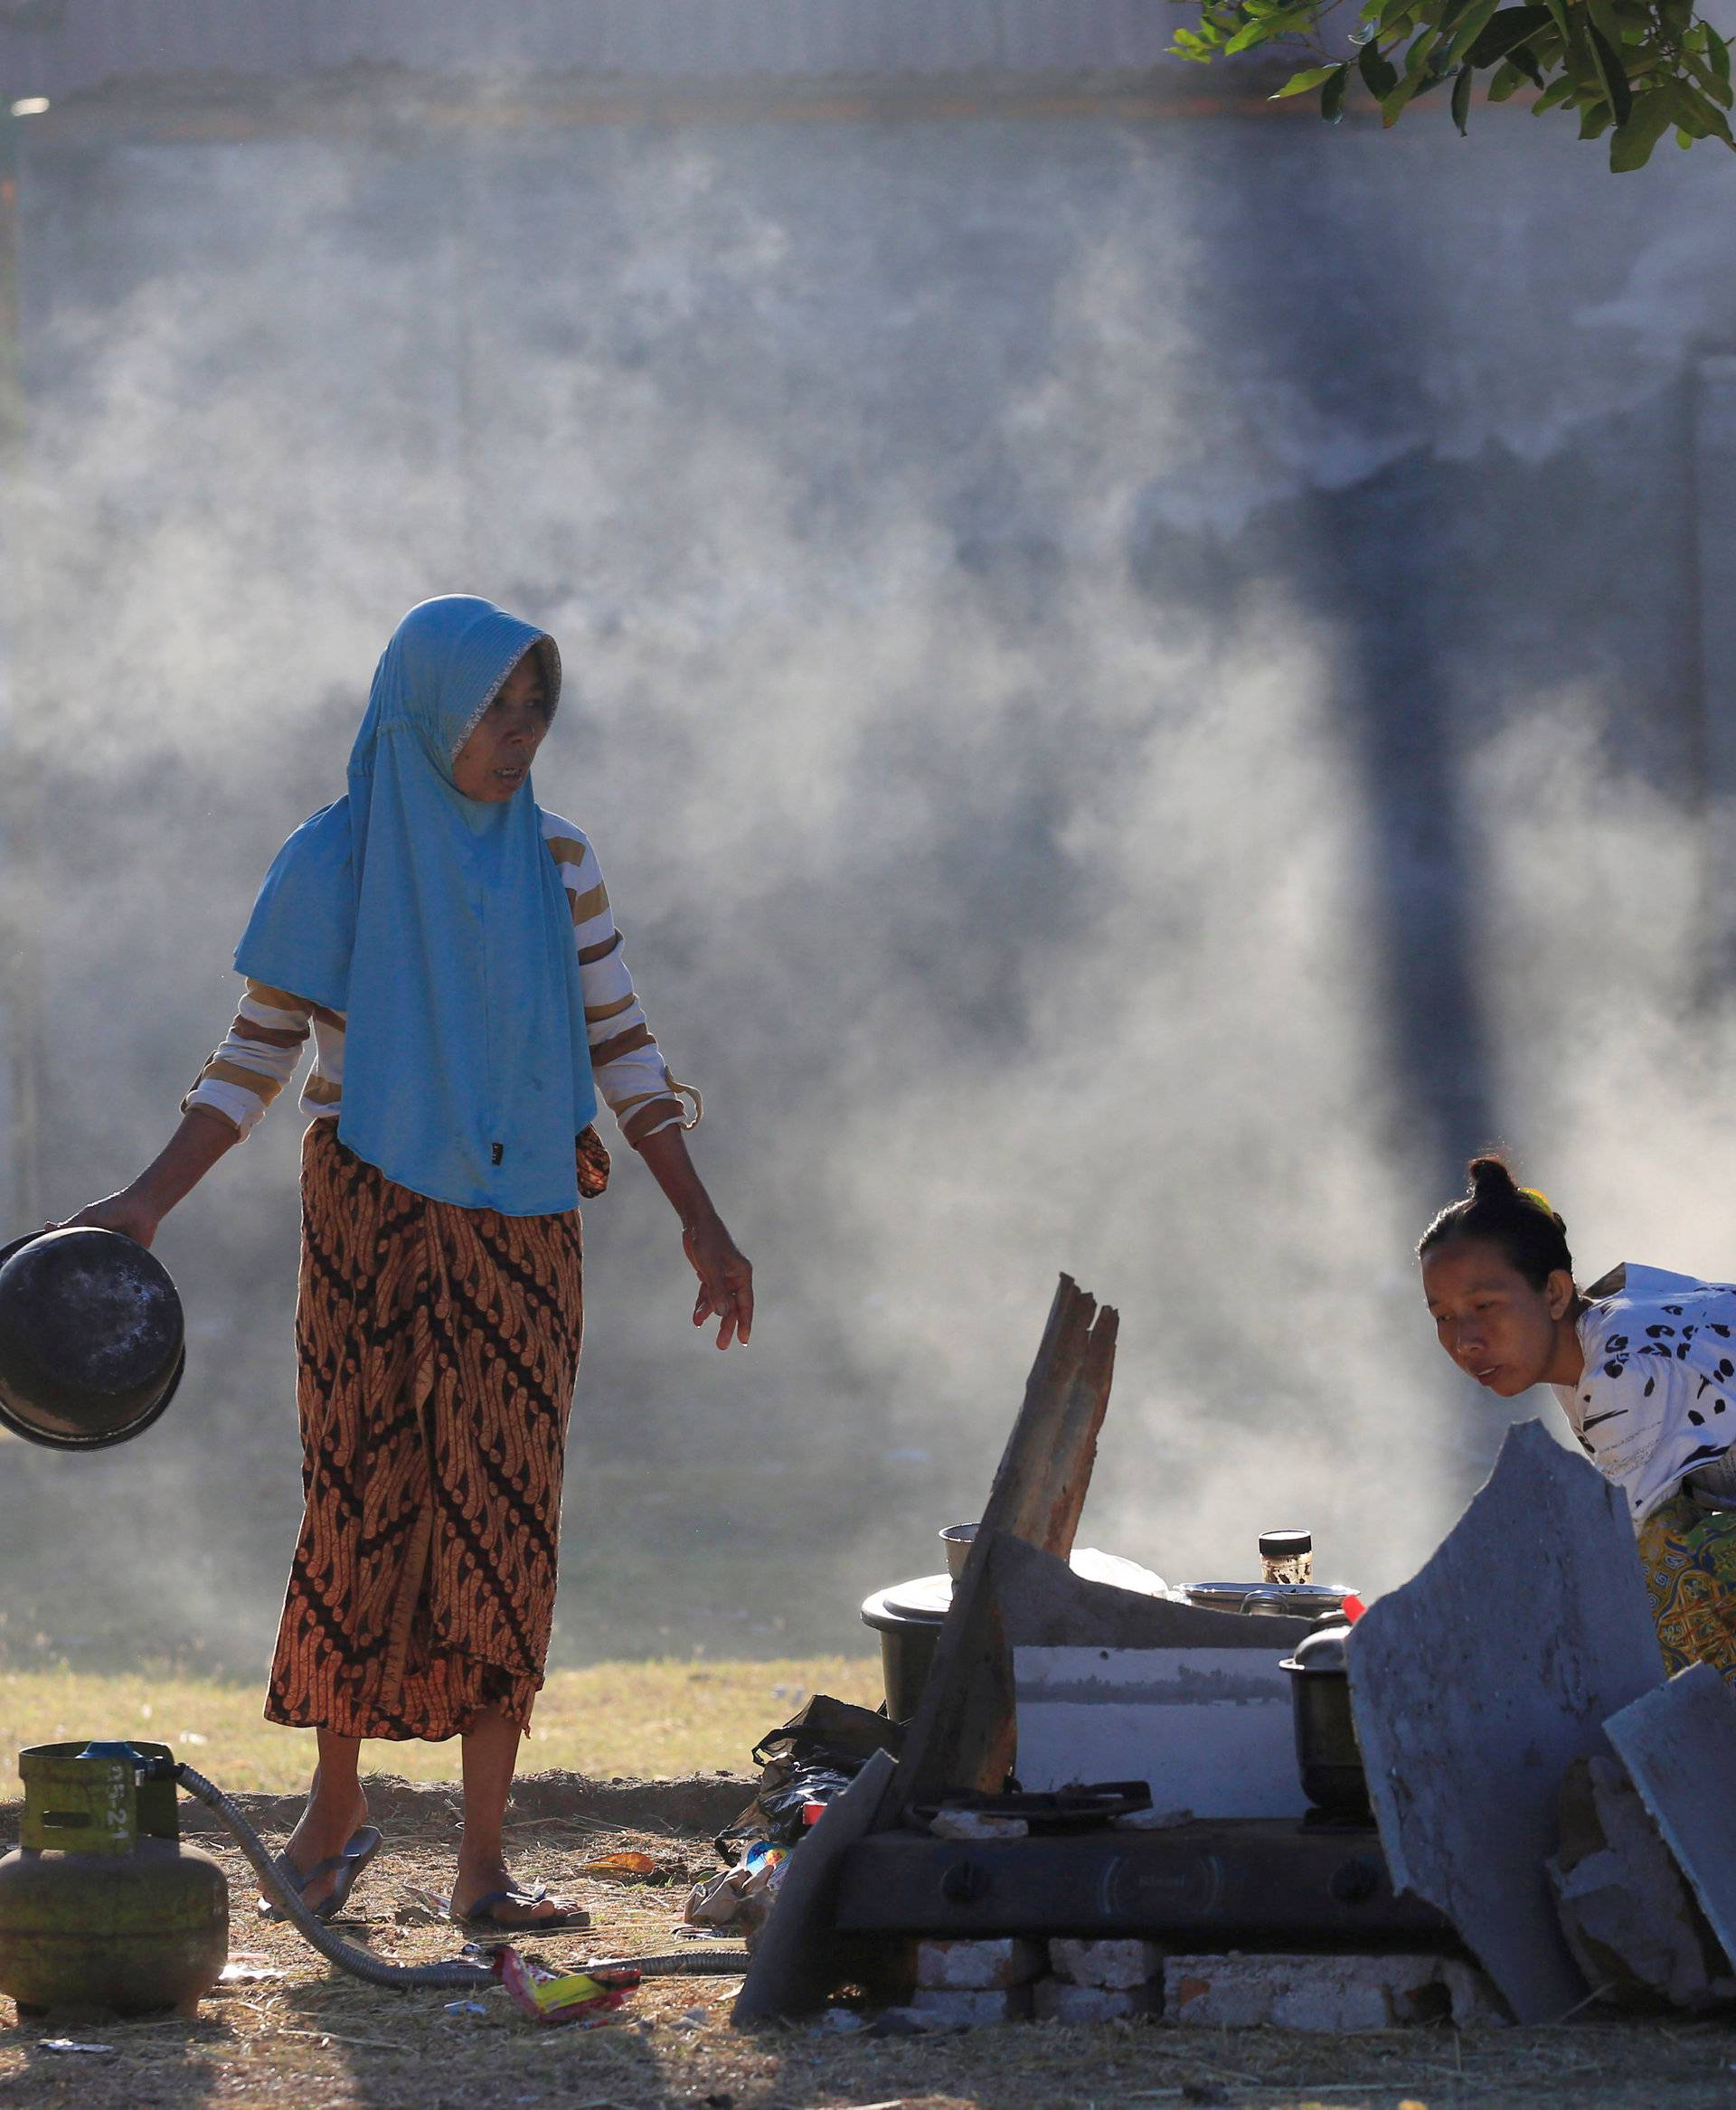 Villagers cook at their temporary shelter after an earthquake hit on Sunday in Pemenang